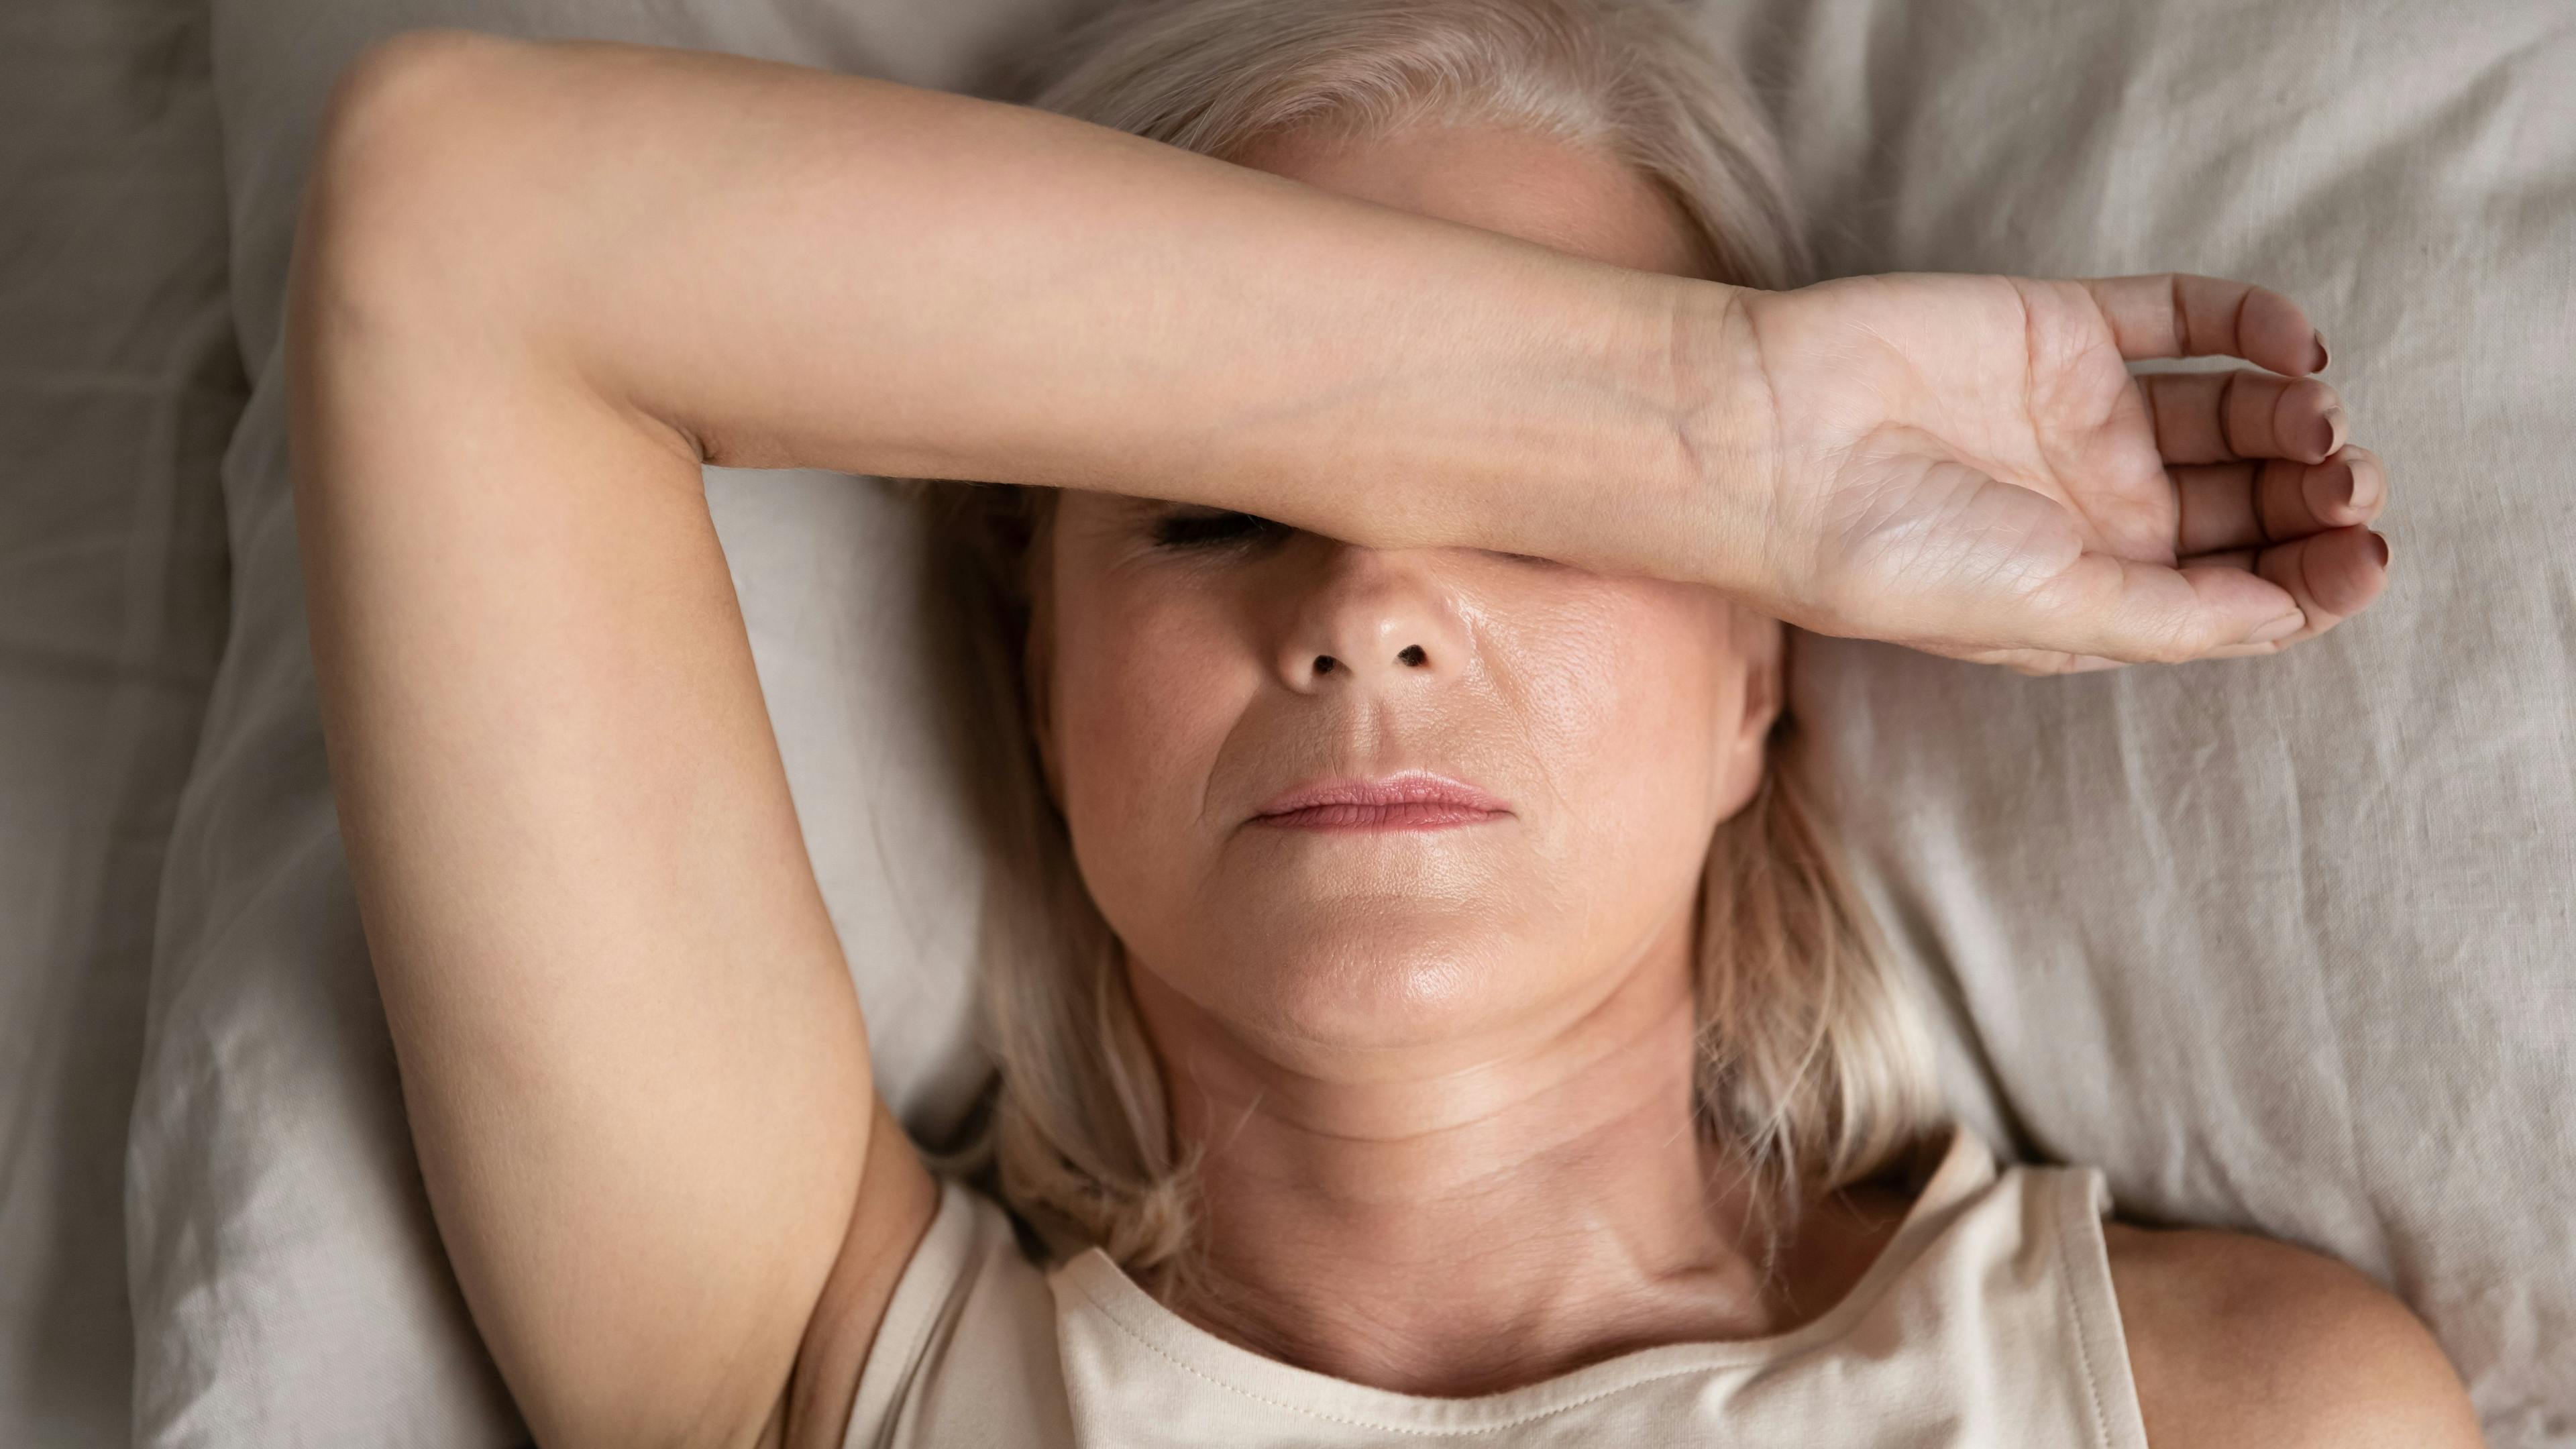 Depressive Symptoms in Menopause Associated With Cognitive Performance